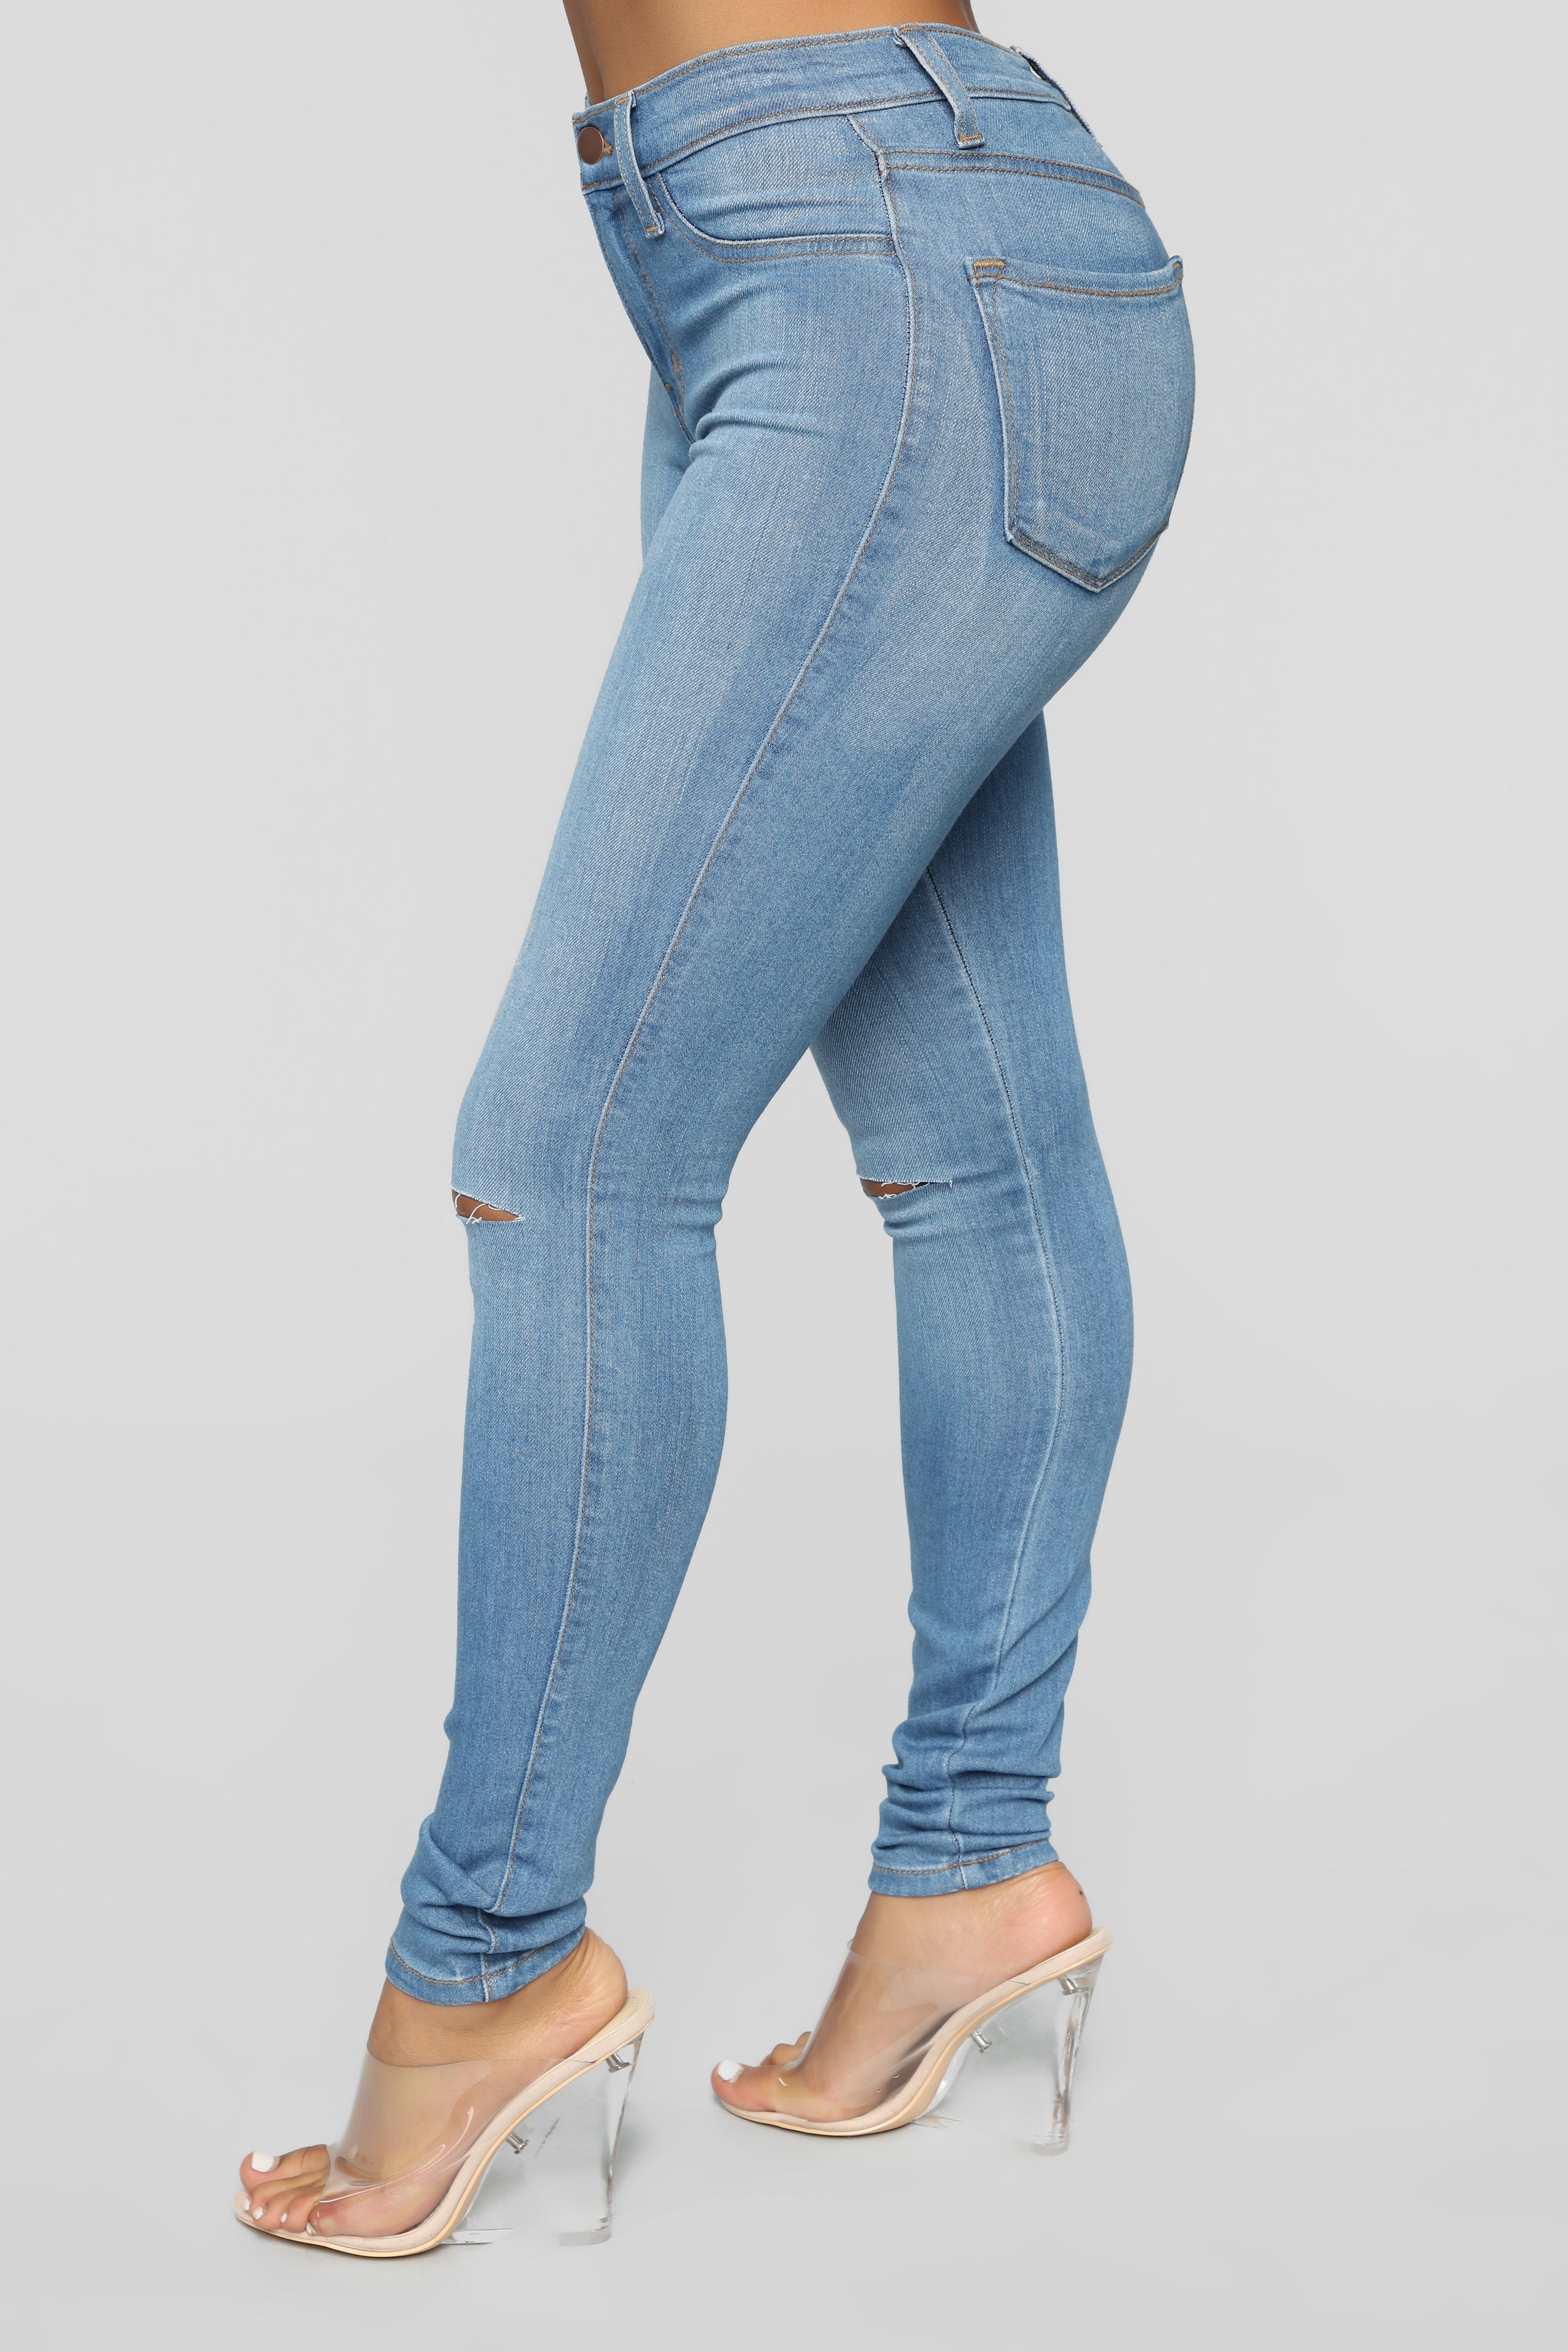 Canopy Jeans - Light Blue Wash